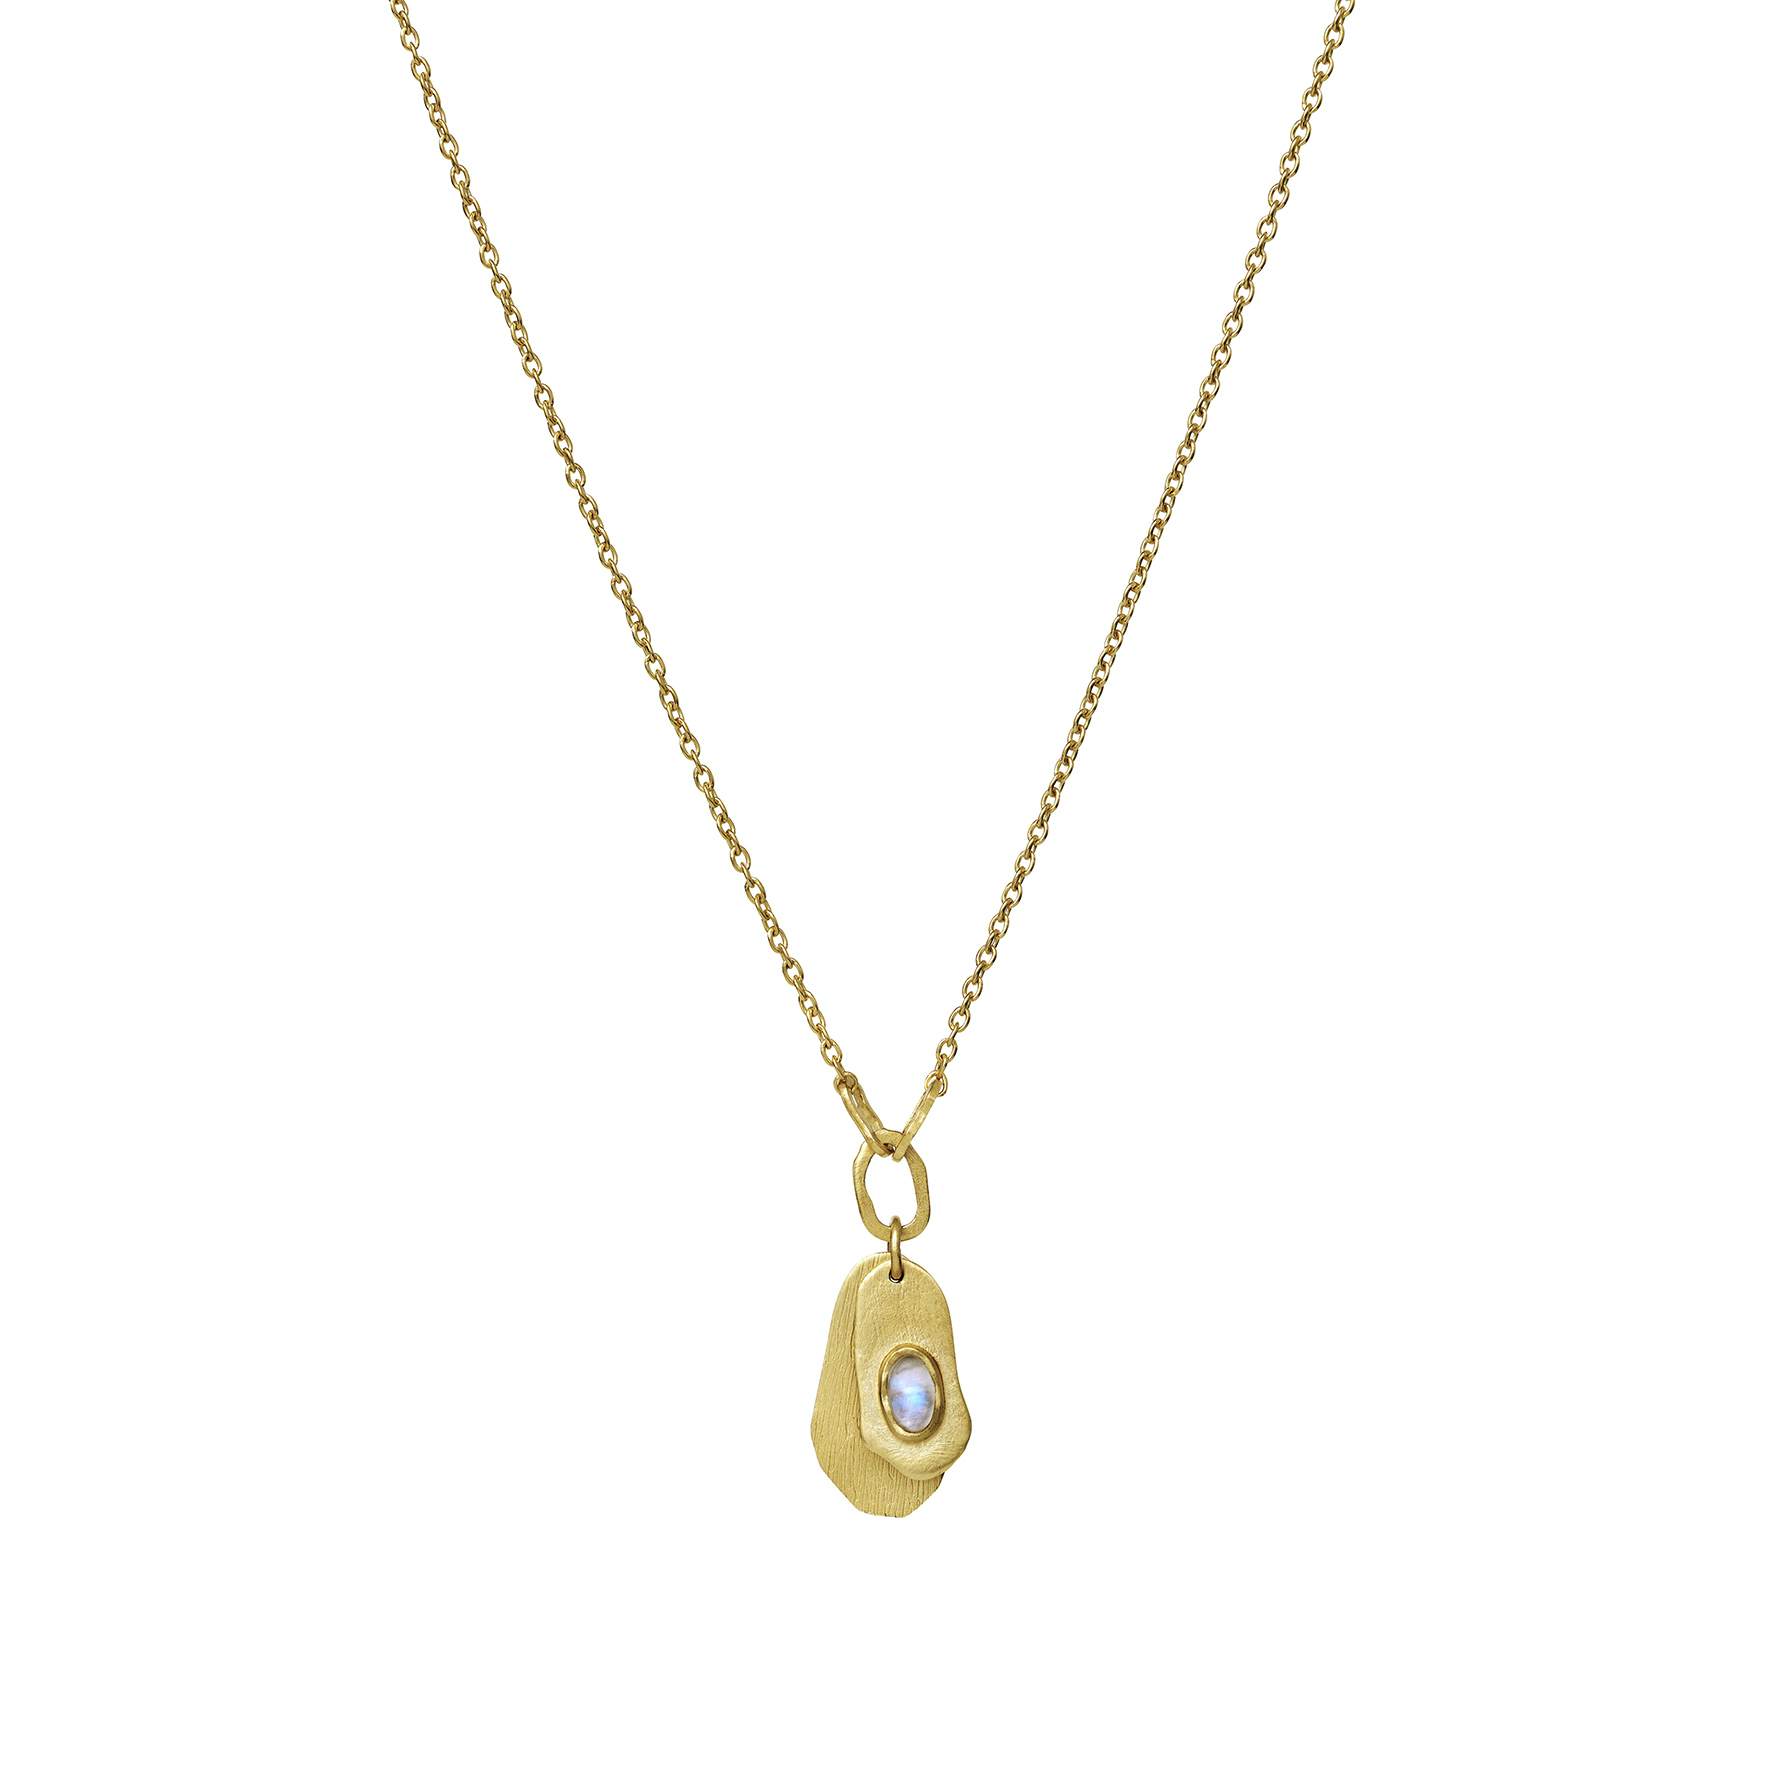 Aju Necklace from Maanesten in Goldplated-Silver Sterling 925